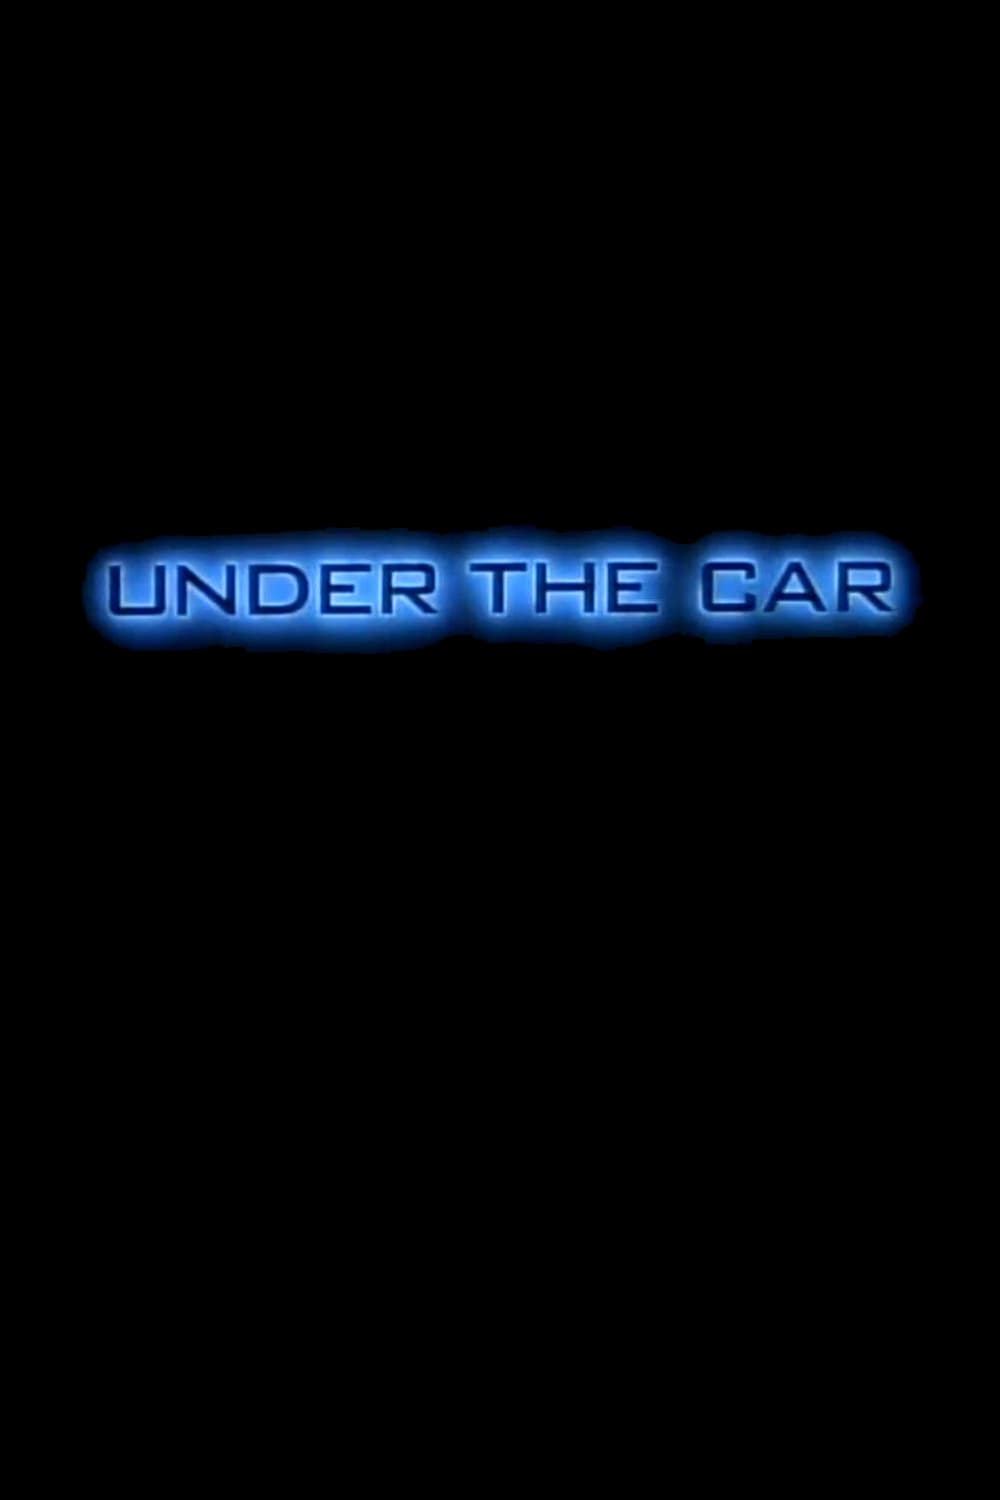 Under the Car (1992)